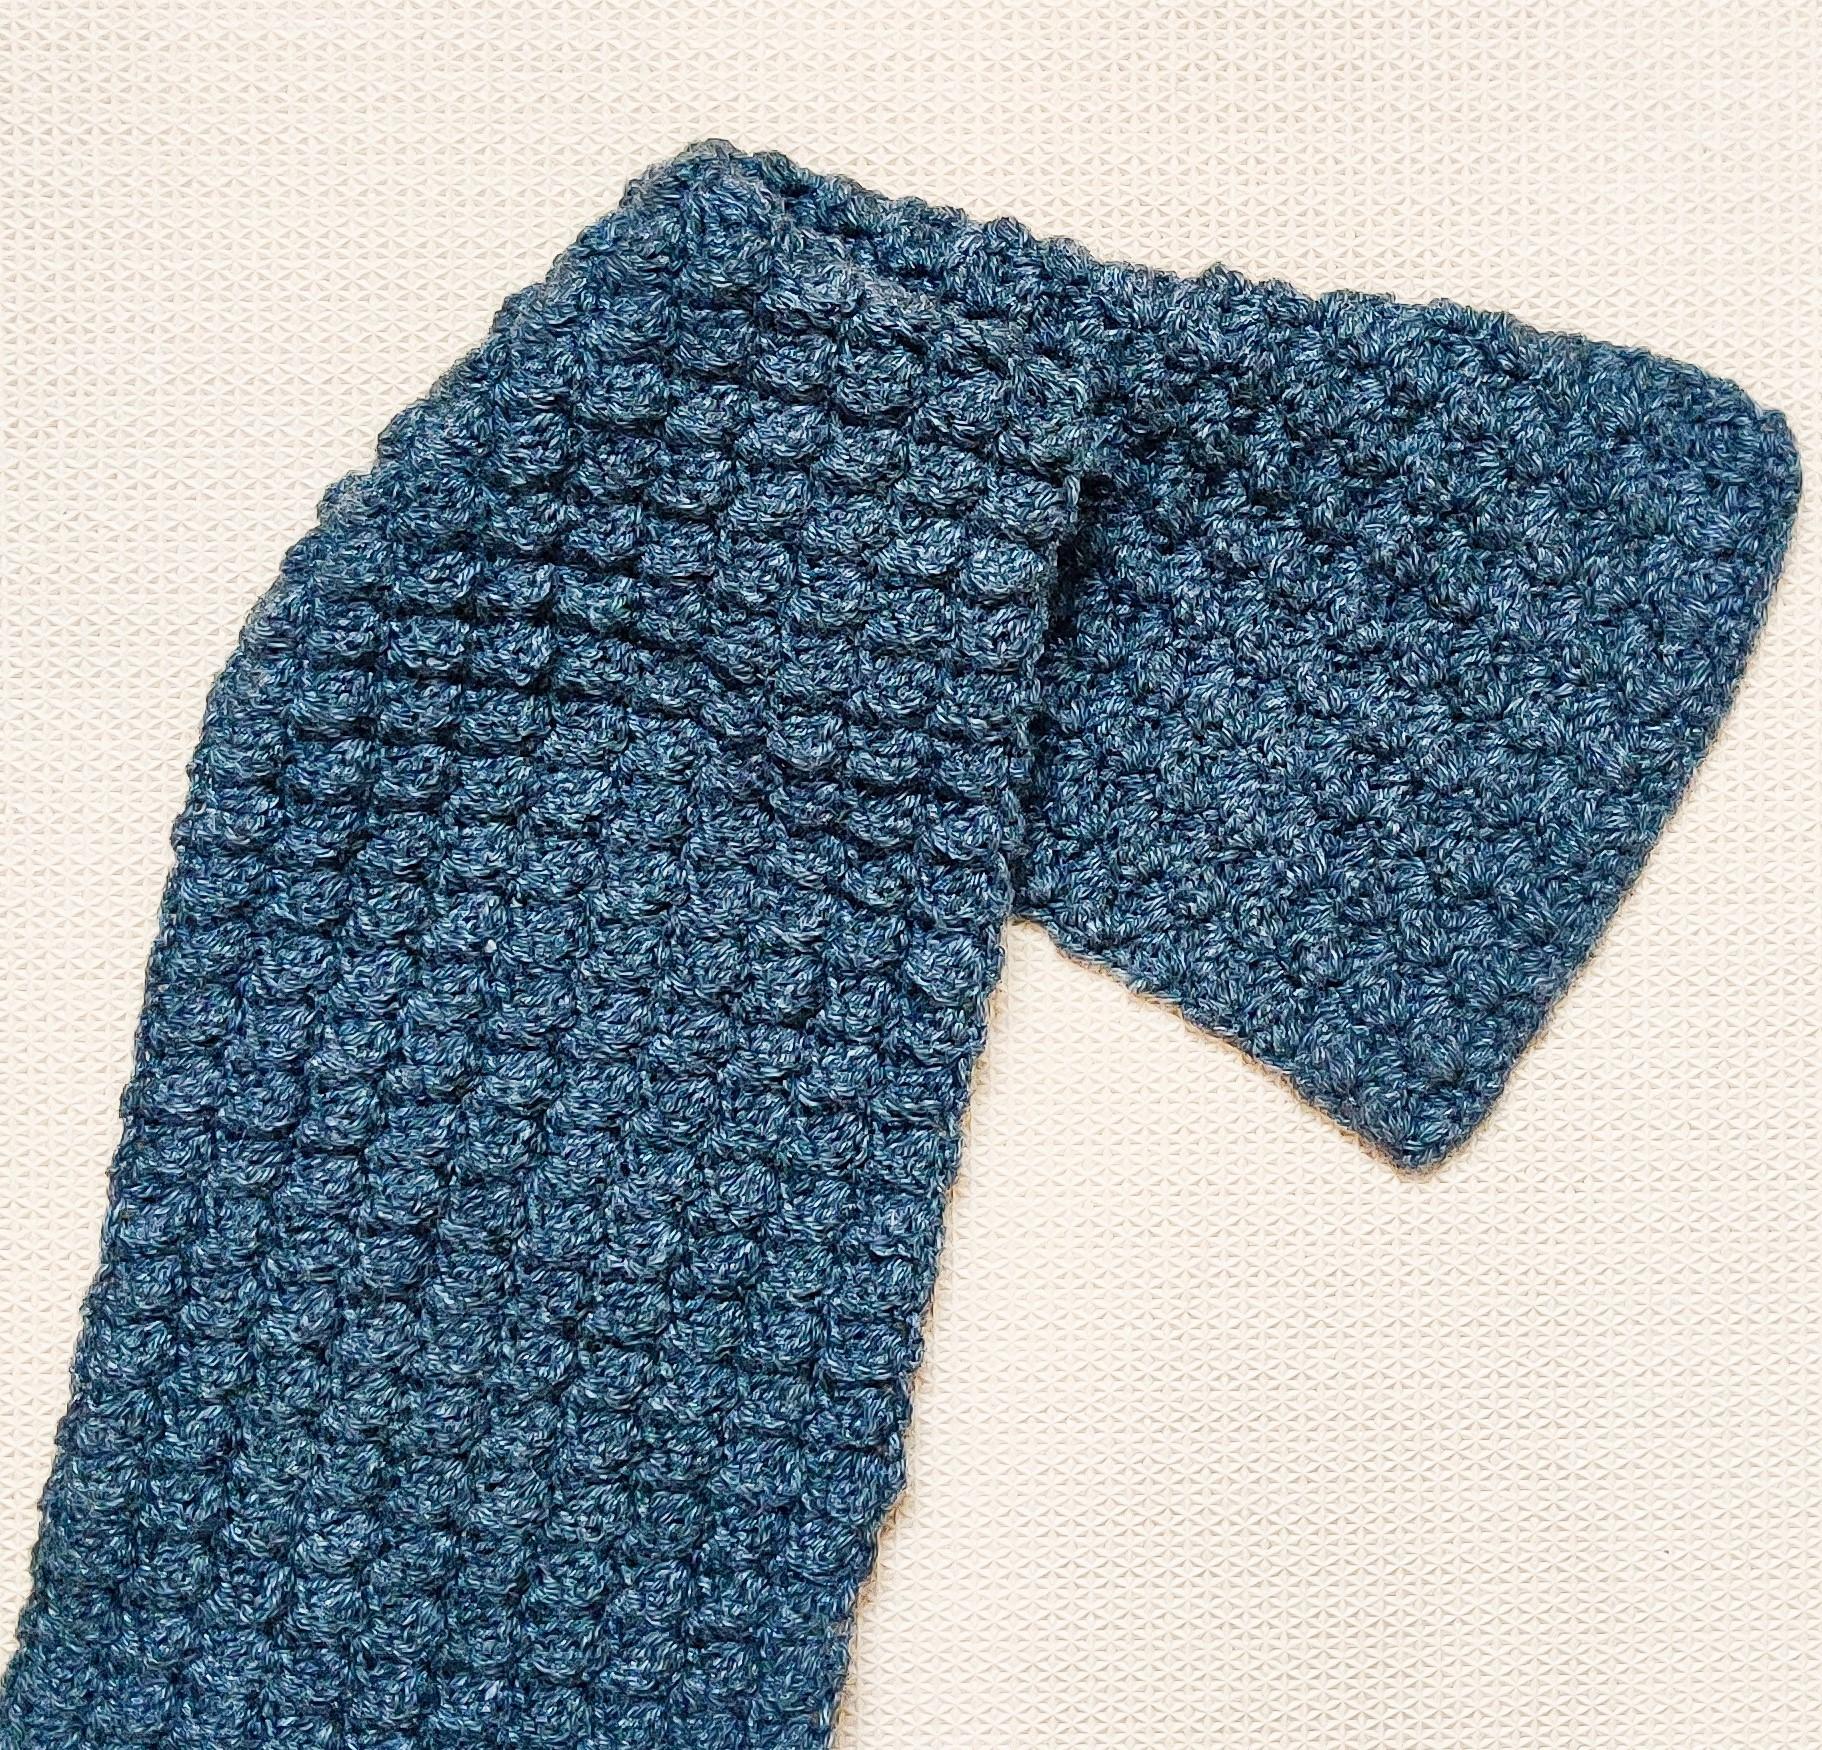 How to Crochet a Scarf Easy Textured Crochet Scarf Pattern.jpg